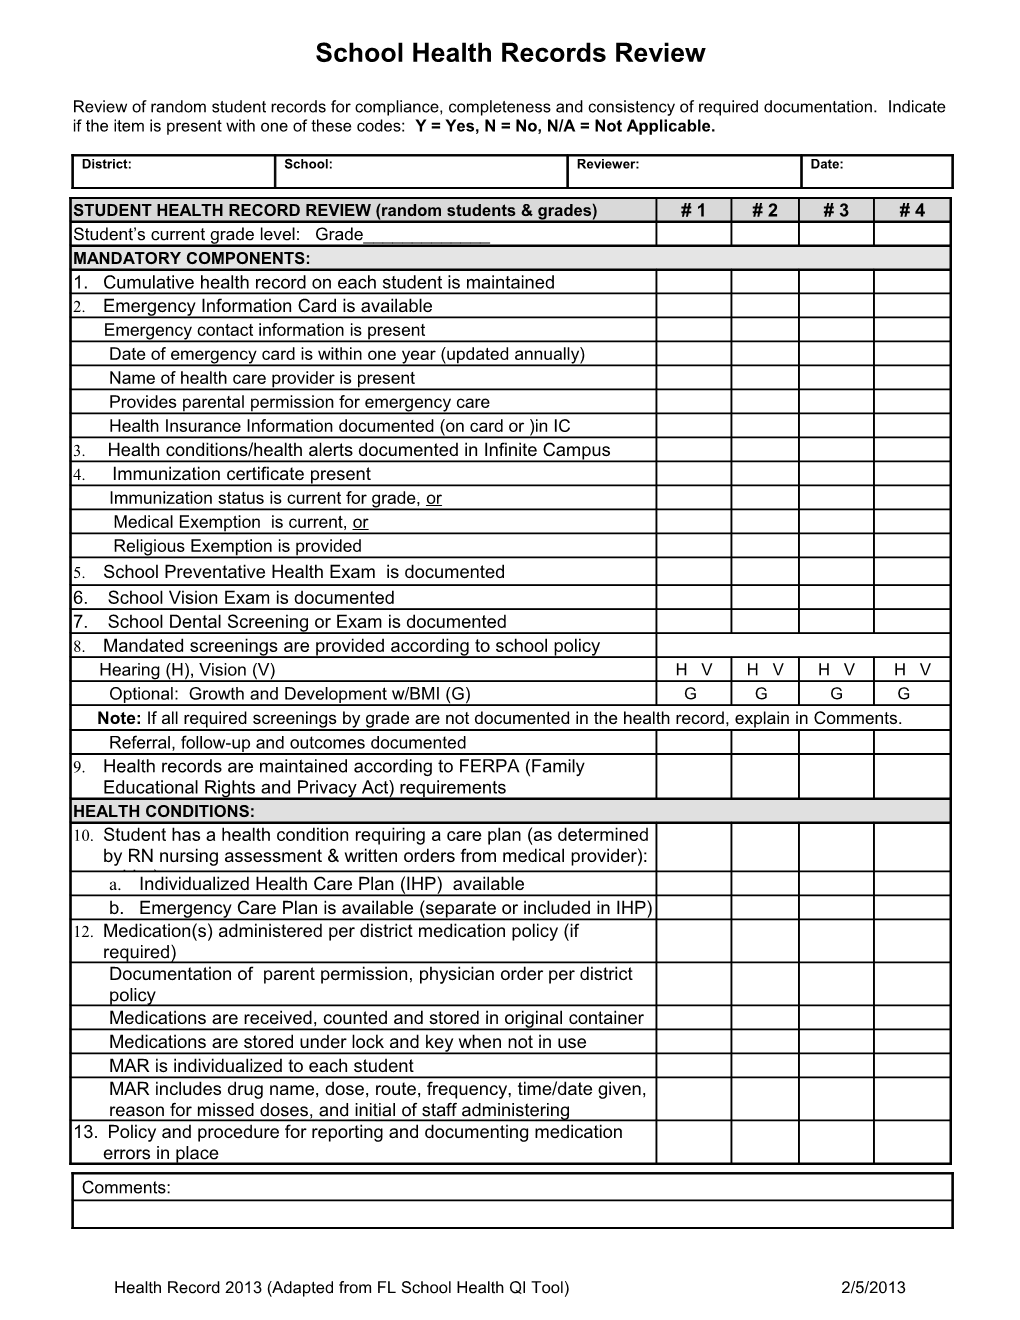 School Health Records Review